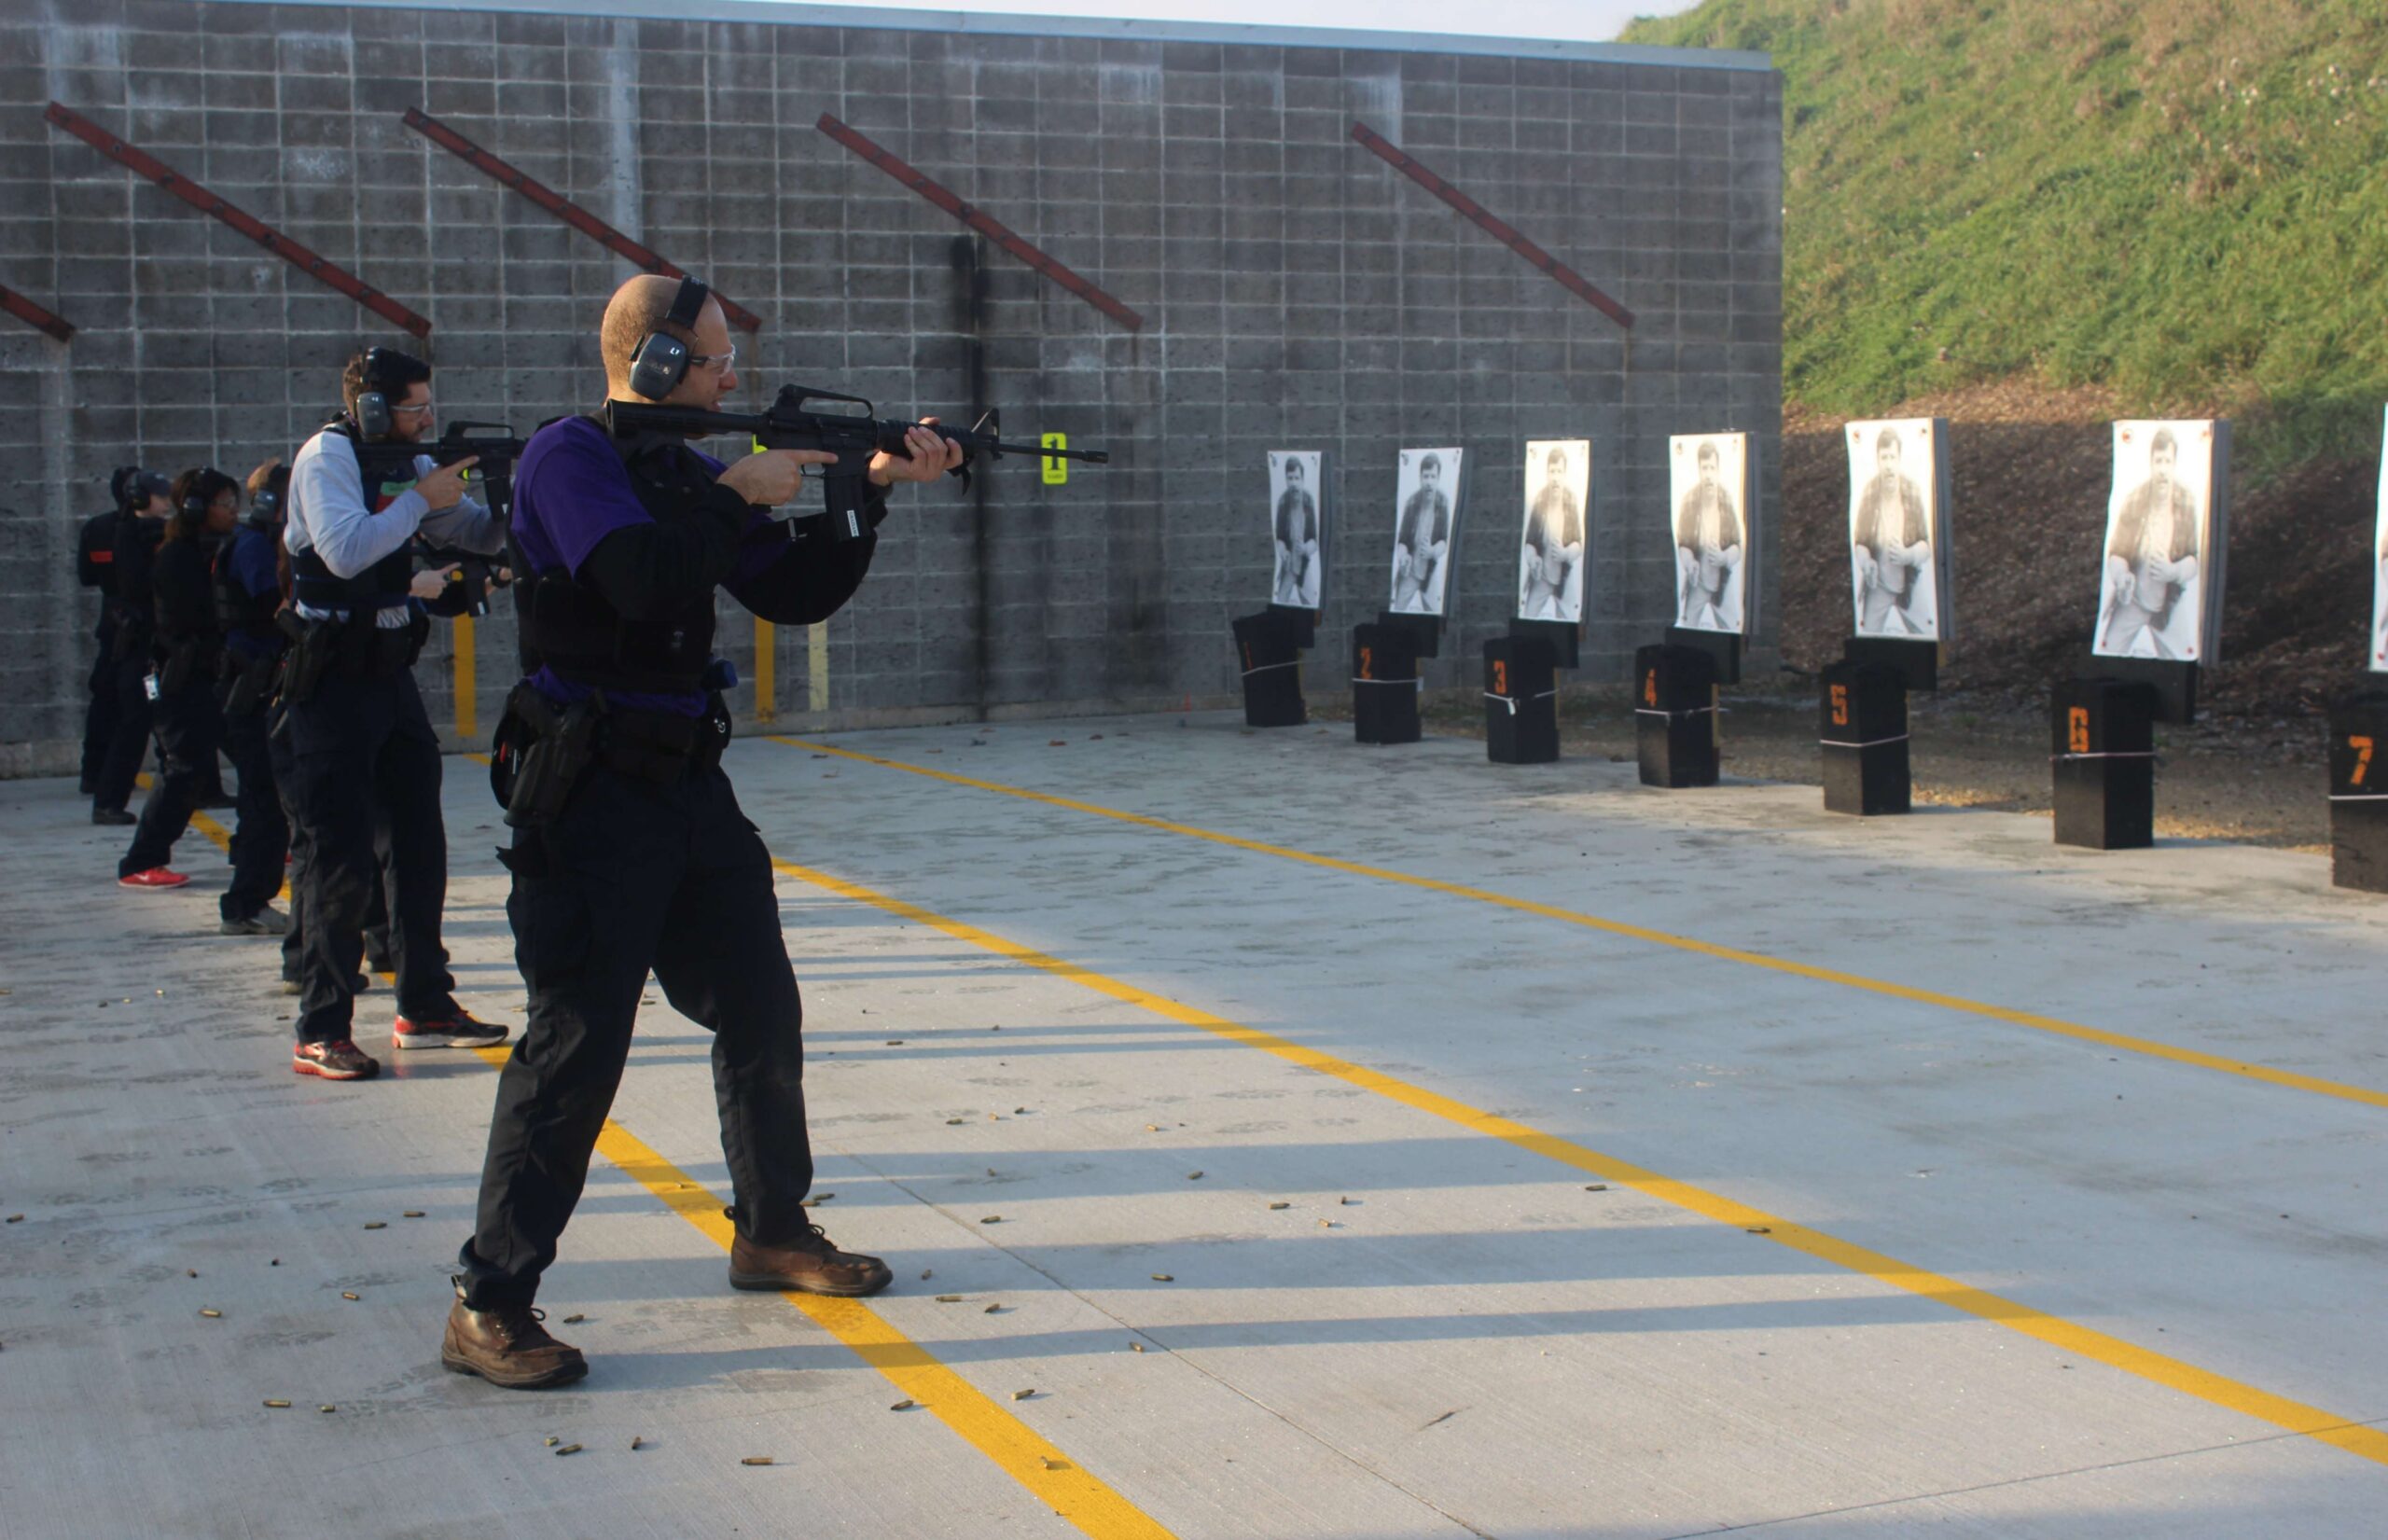 Recruits practice rifle shooting as part of a training exercise.